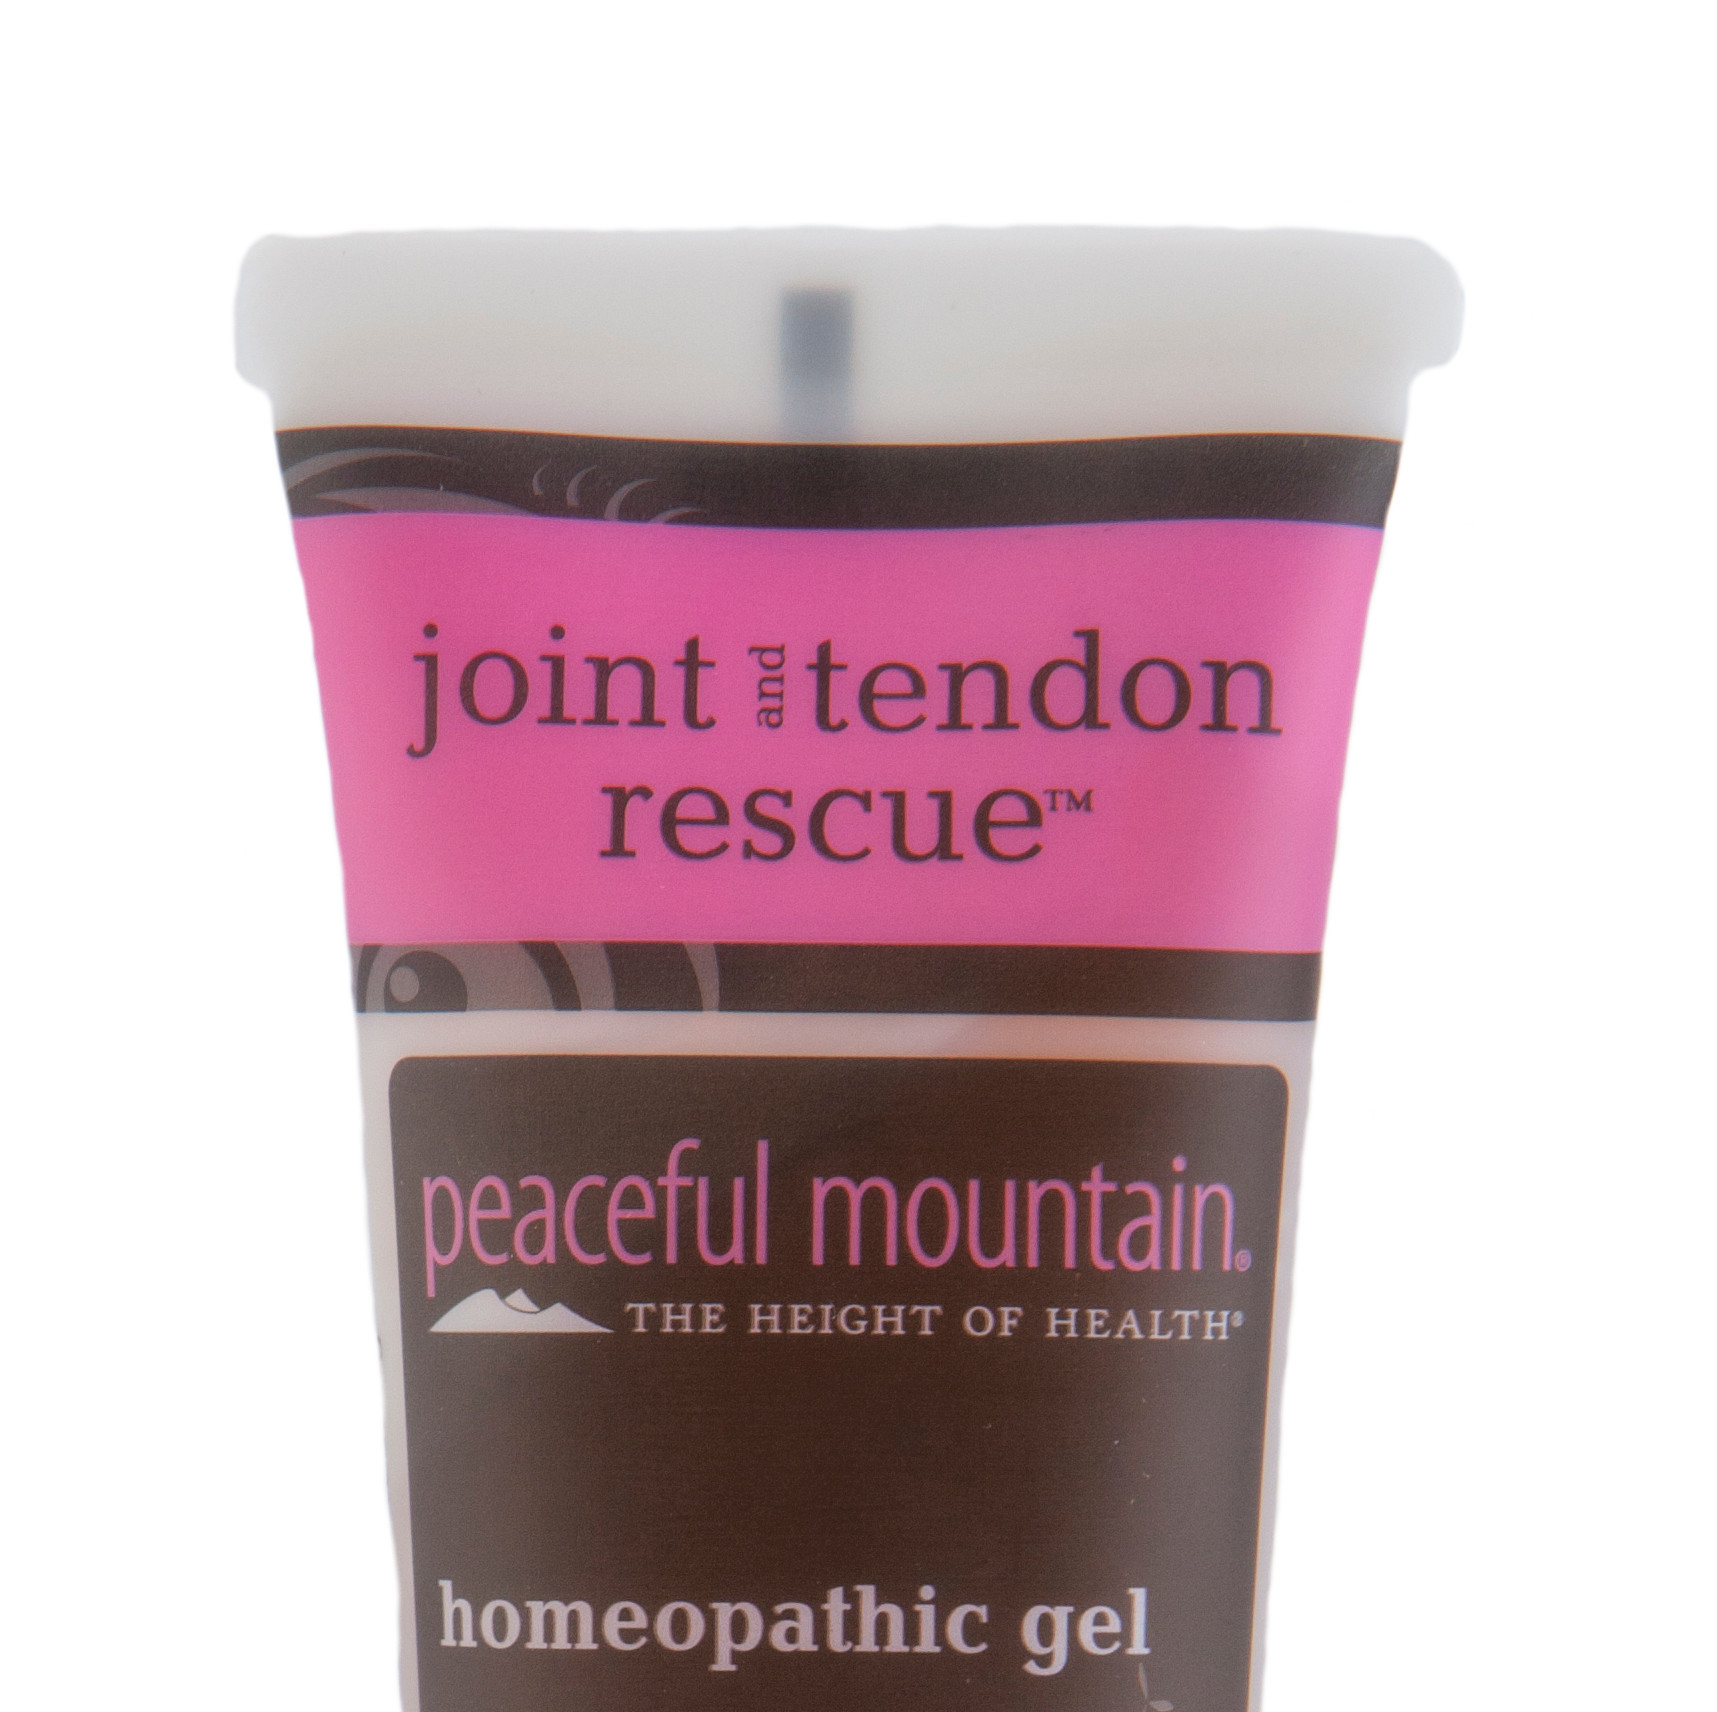 joint and tendon rescue